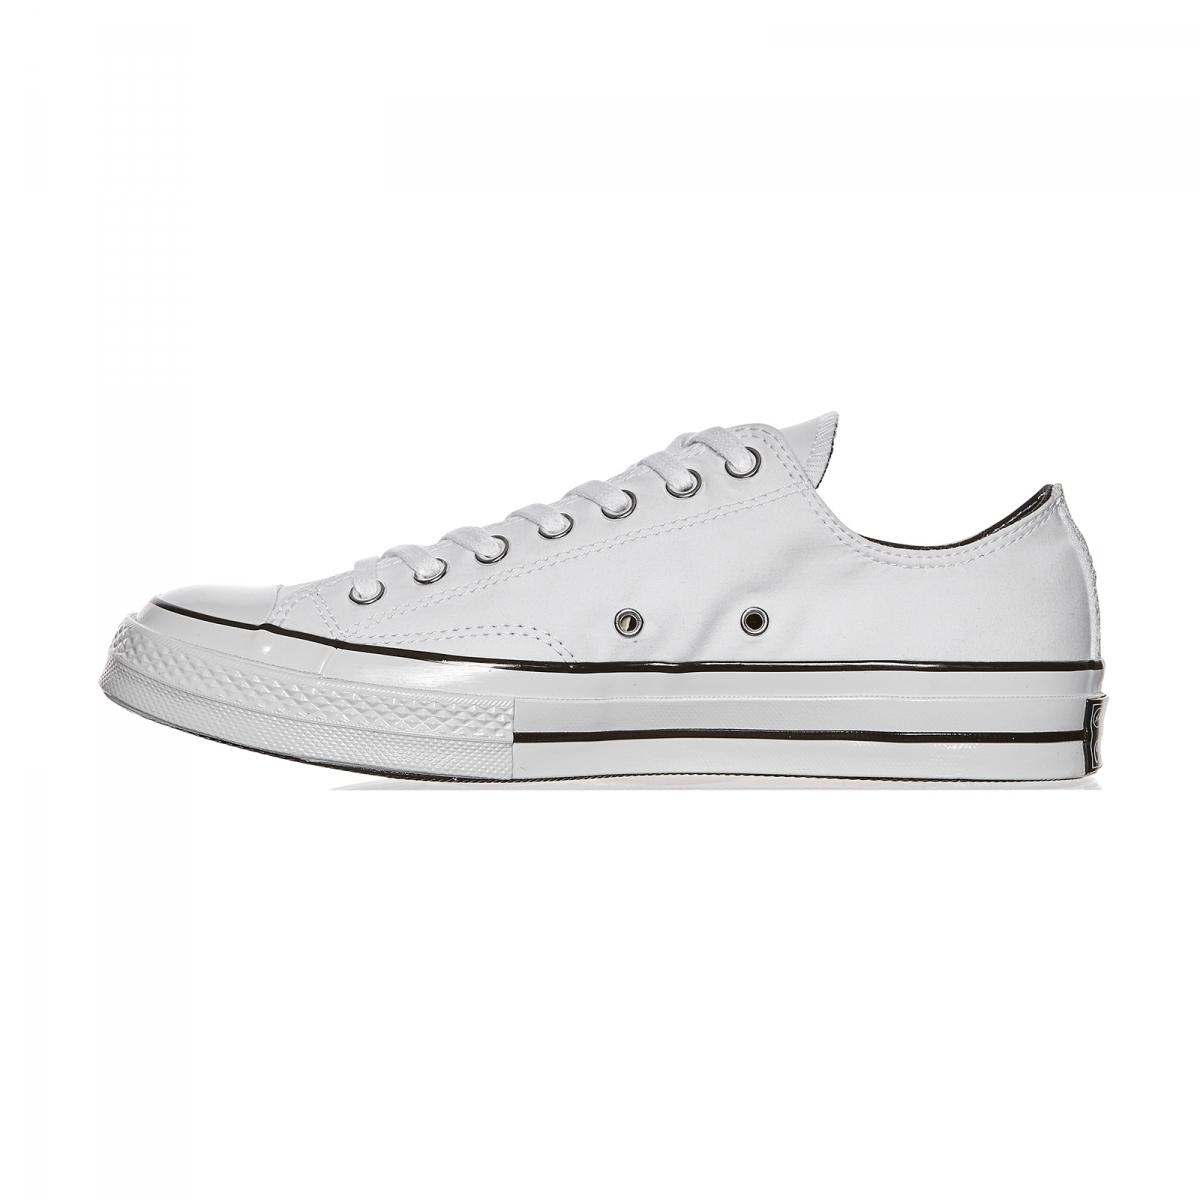 Lyst - Converse Fragment Design X Chuck 70s 'tuxedo Pack' Sneakers in White